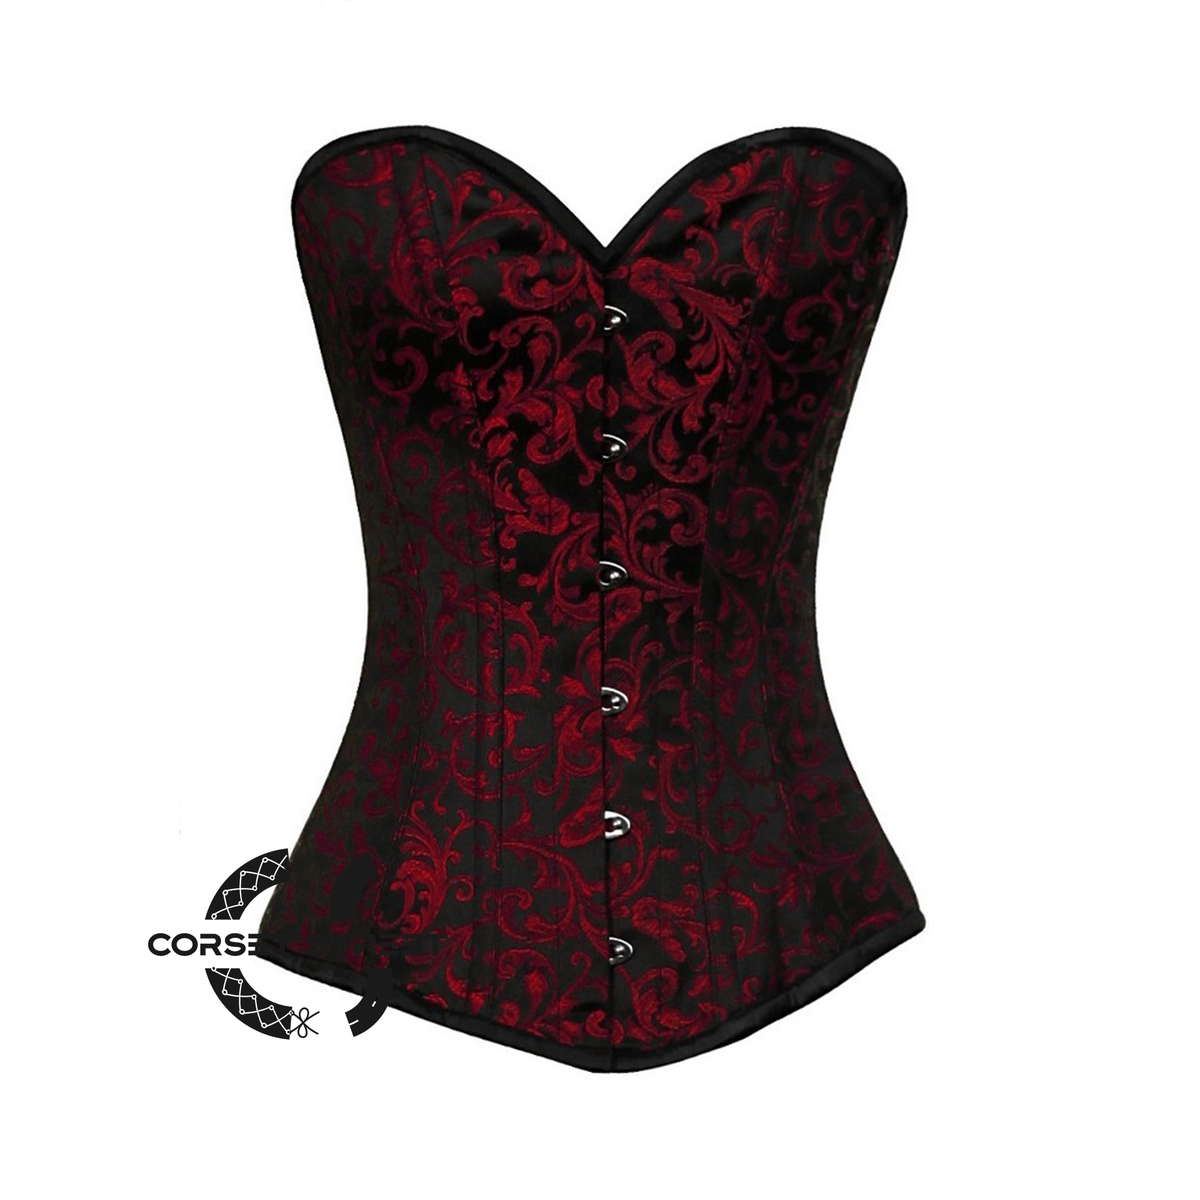 Red Black Brocade Gothic Steampunk Waist Training Bustiers Burlesque LONG Overbust Plus Size Corset Costume